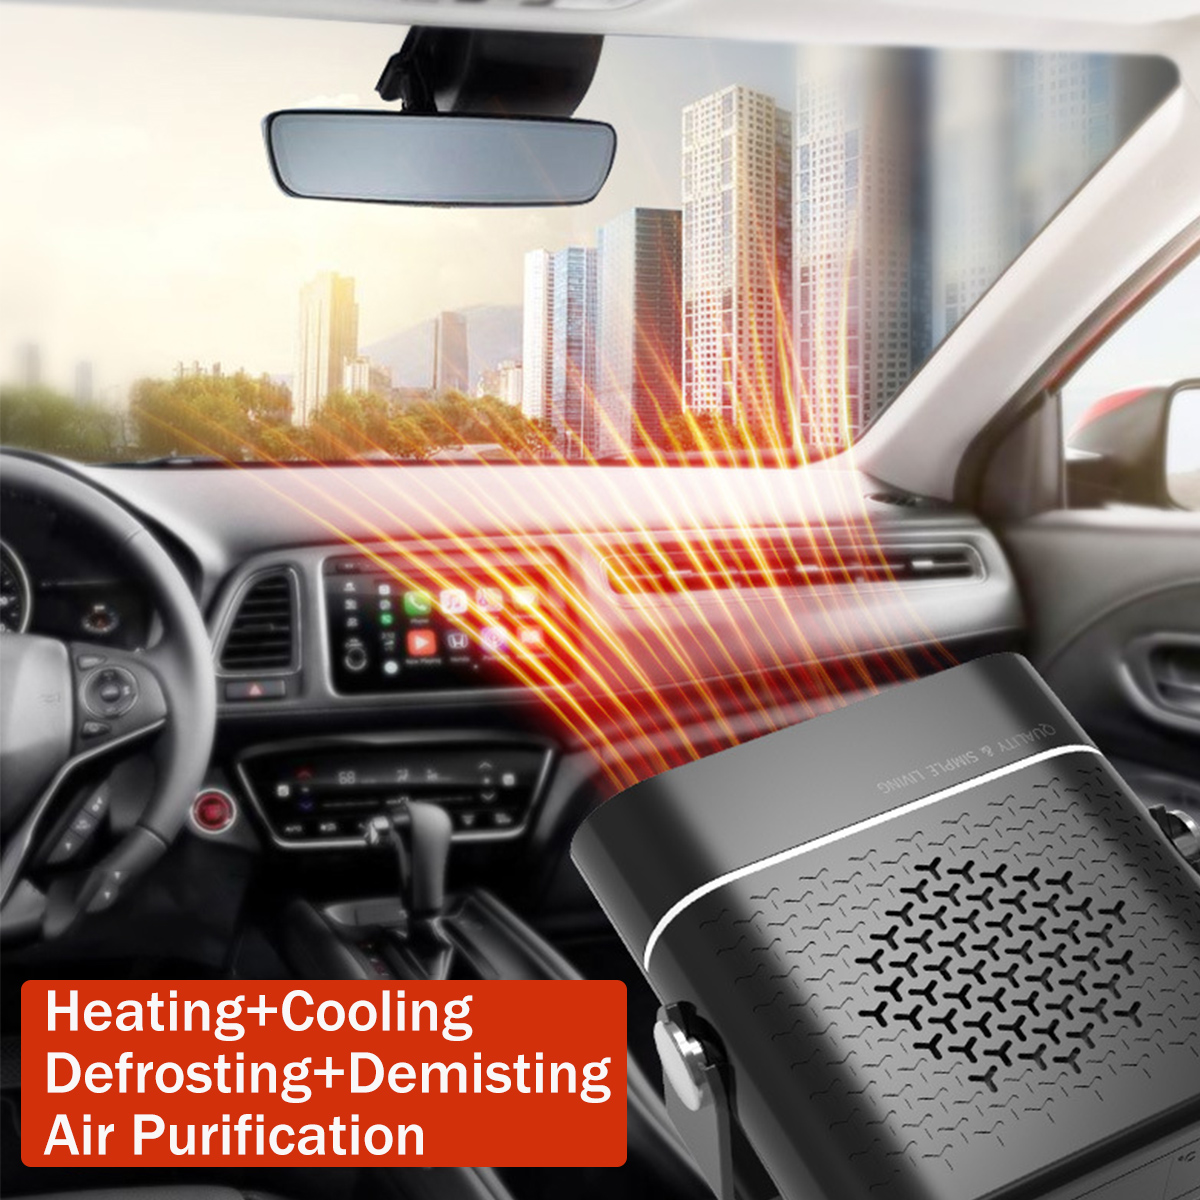 Portable-Car-Heater-Fast-Heating-Fan-360-Degree-Rotary-Winter-Defroster-Demisting-Air-Purification-1-1773296-8